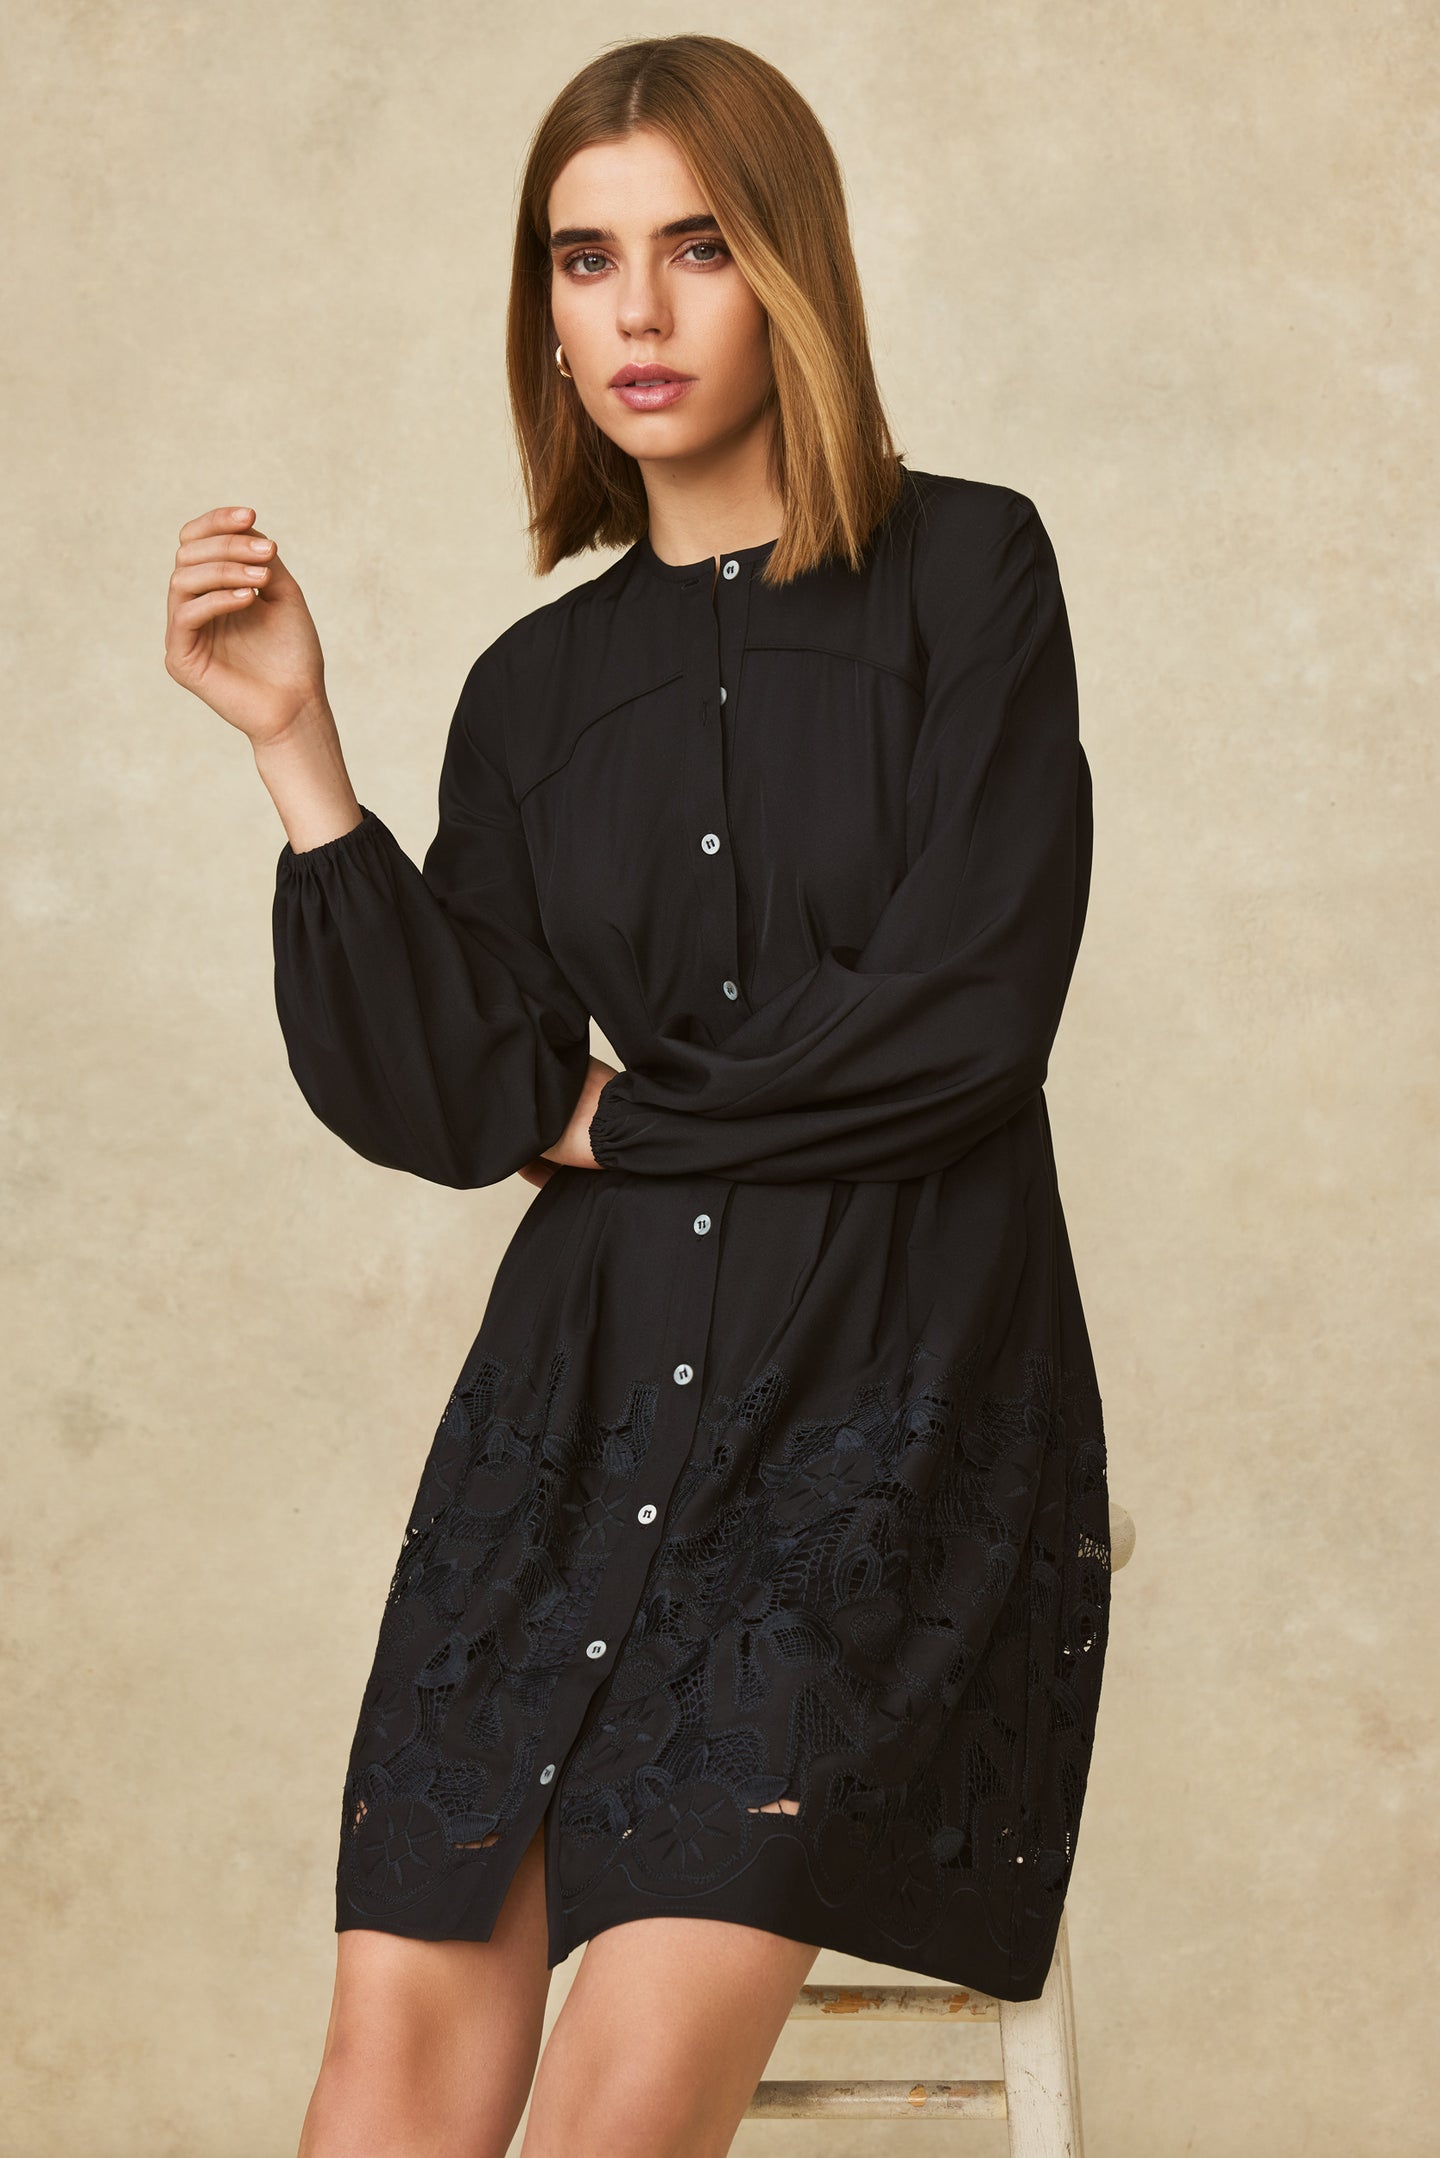 Floral Embroidered Cotton Button Front Dress